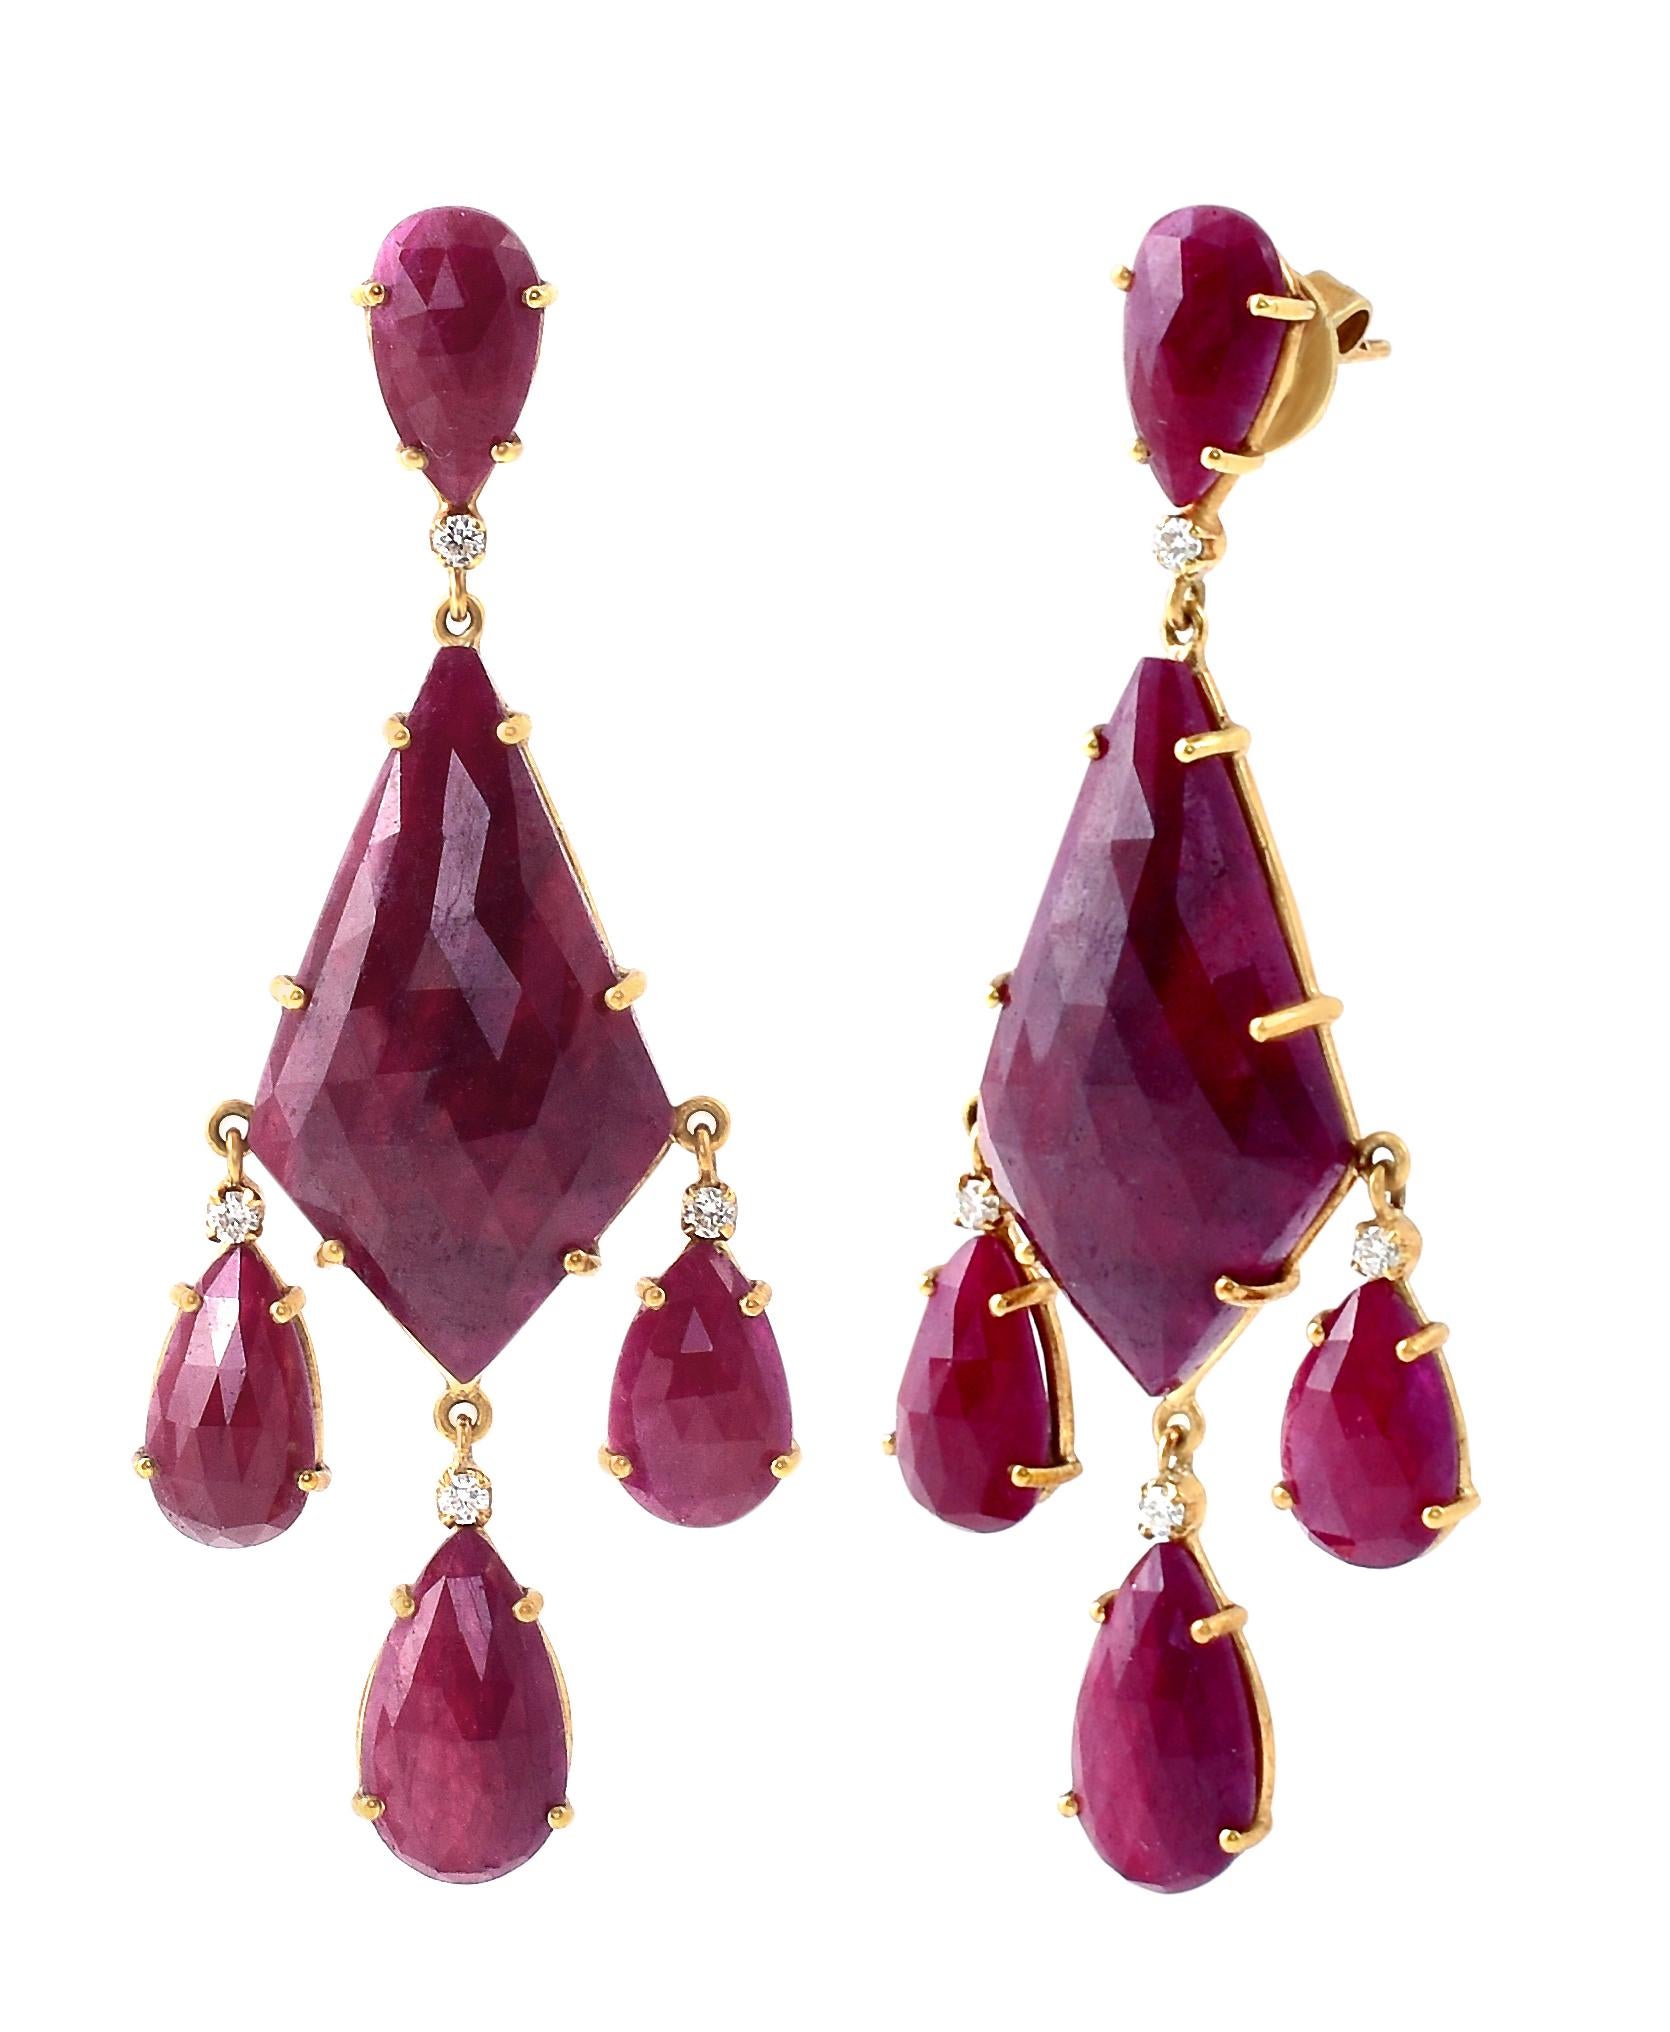 18 Karat Yellow Gold 59.98 Carat Ruby and Diamond Cocktail Dangle Earrings

This magnificent scarlet red and diamond long slice hanging earring is phenomenal. The solitaire long kite shaped faceted slice ruby in 6-grain prong setting in the center